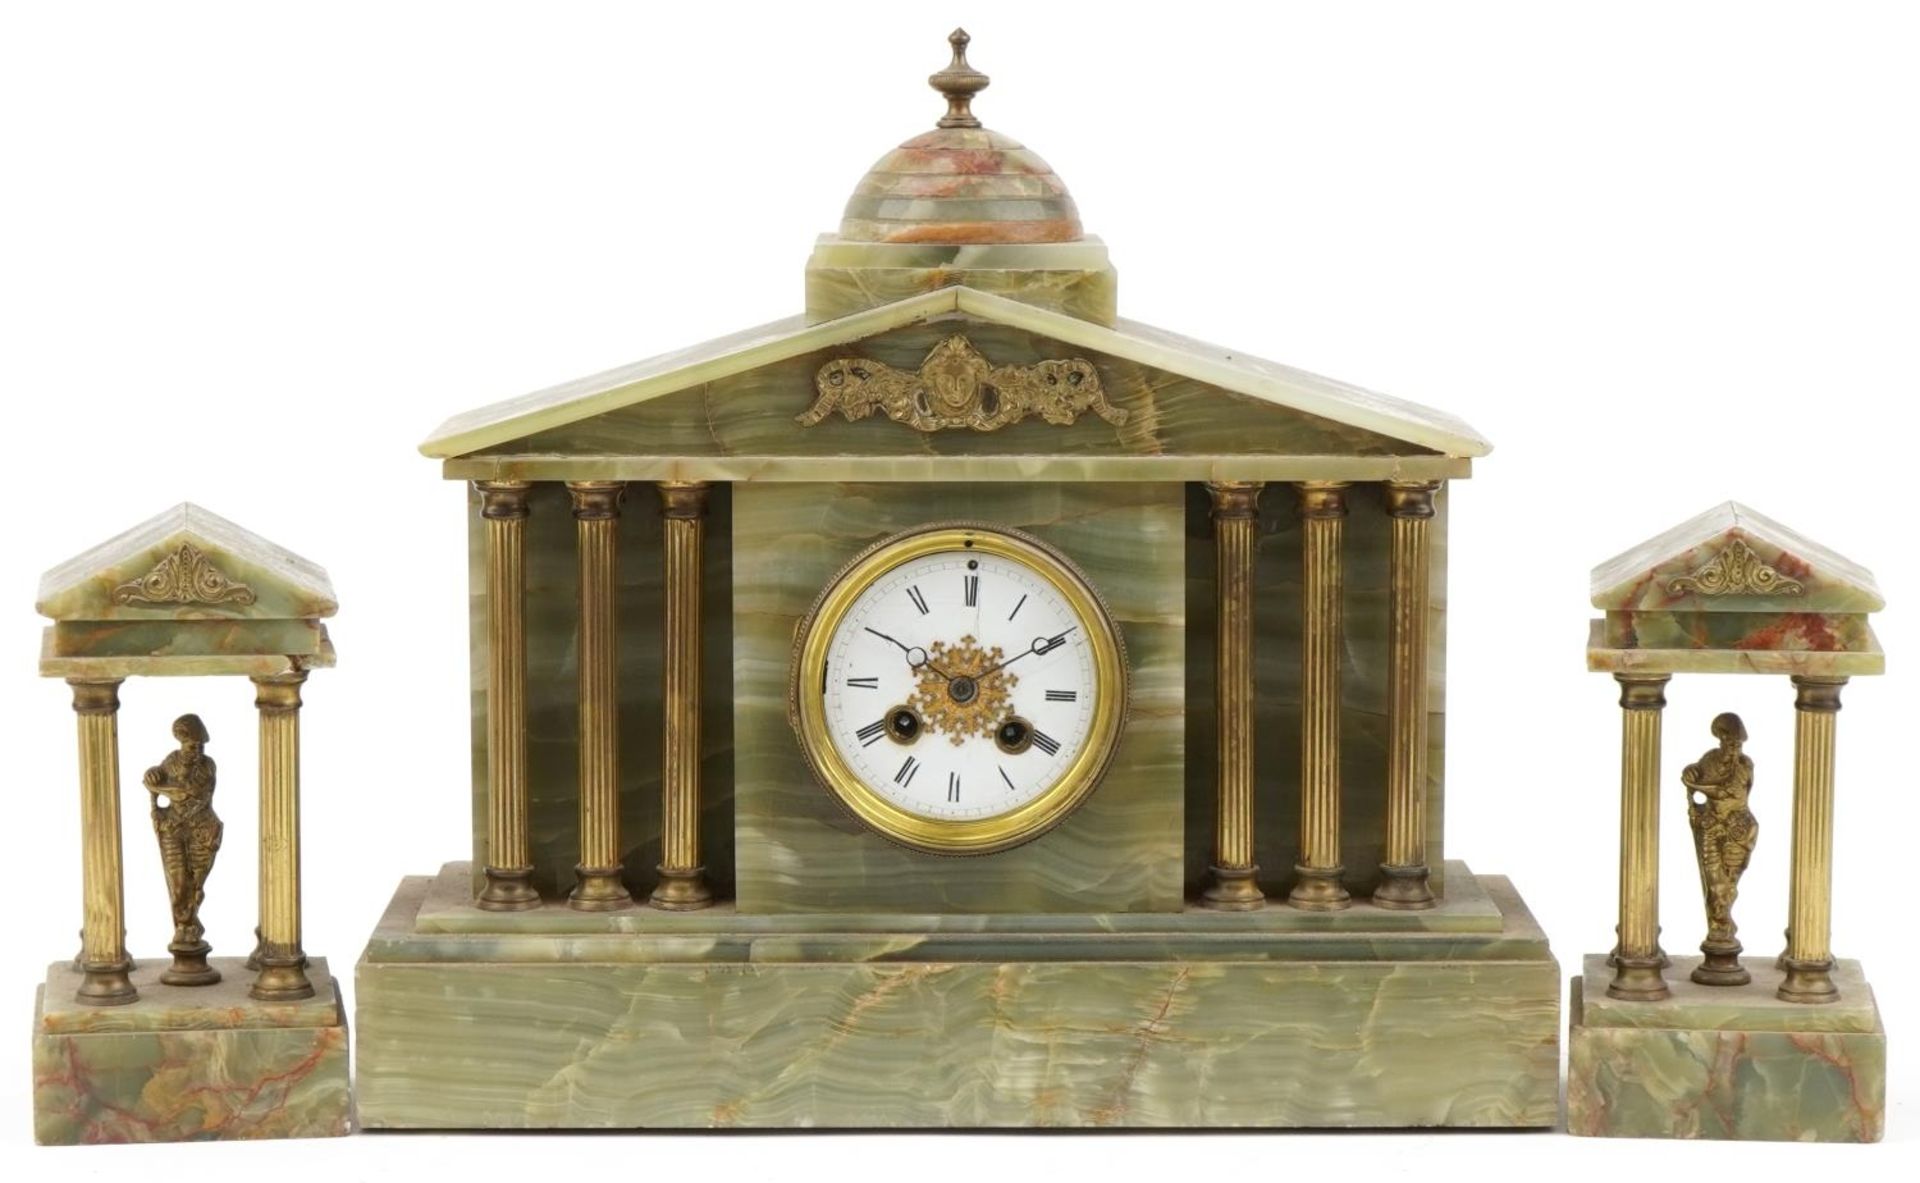 Early 20th century green onyx mantle clock striking on a bell having reeded columns and figural